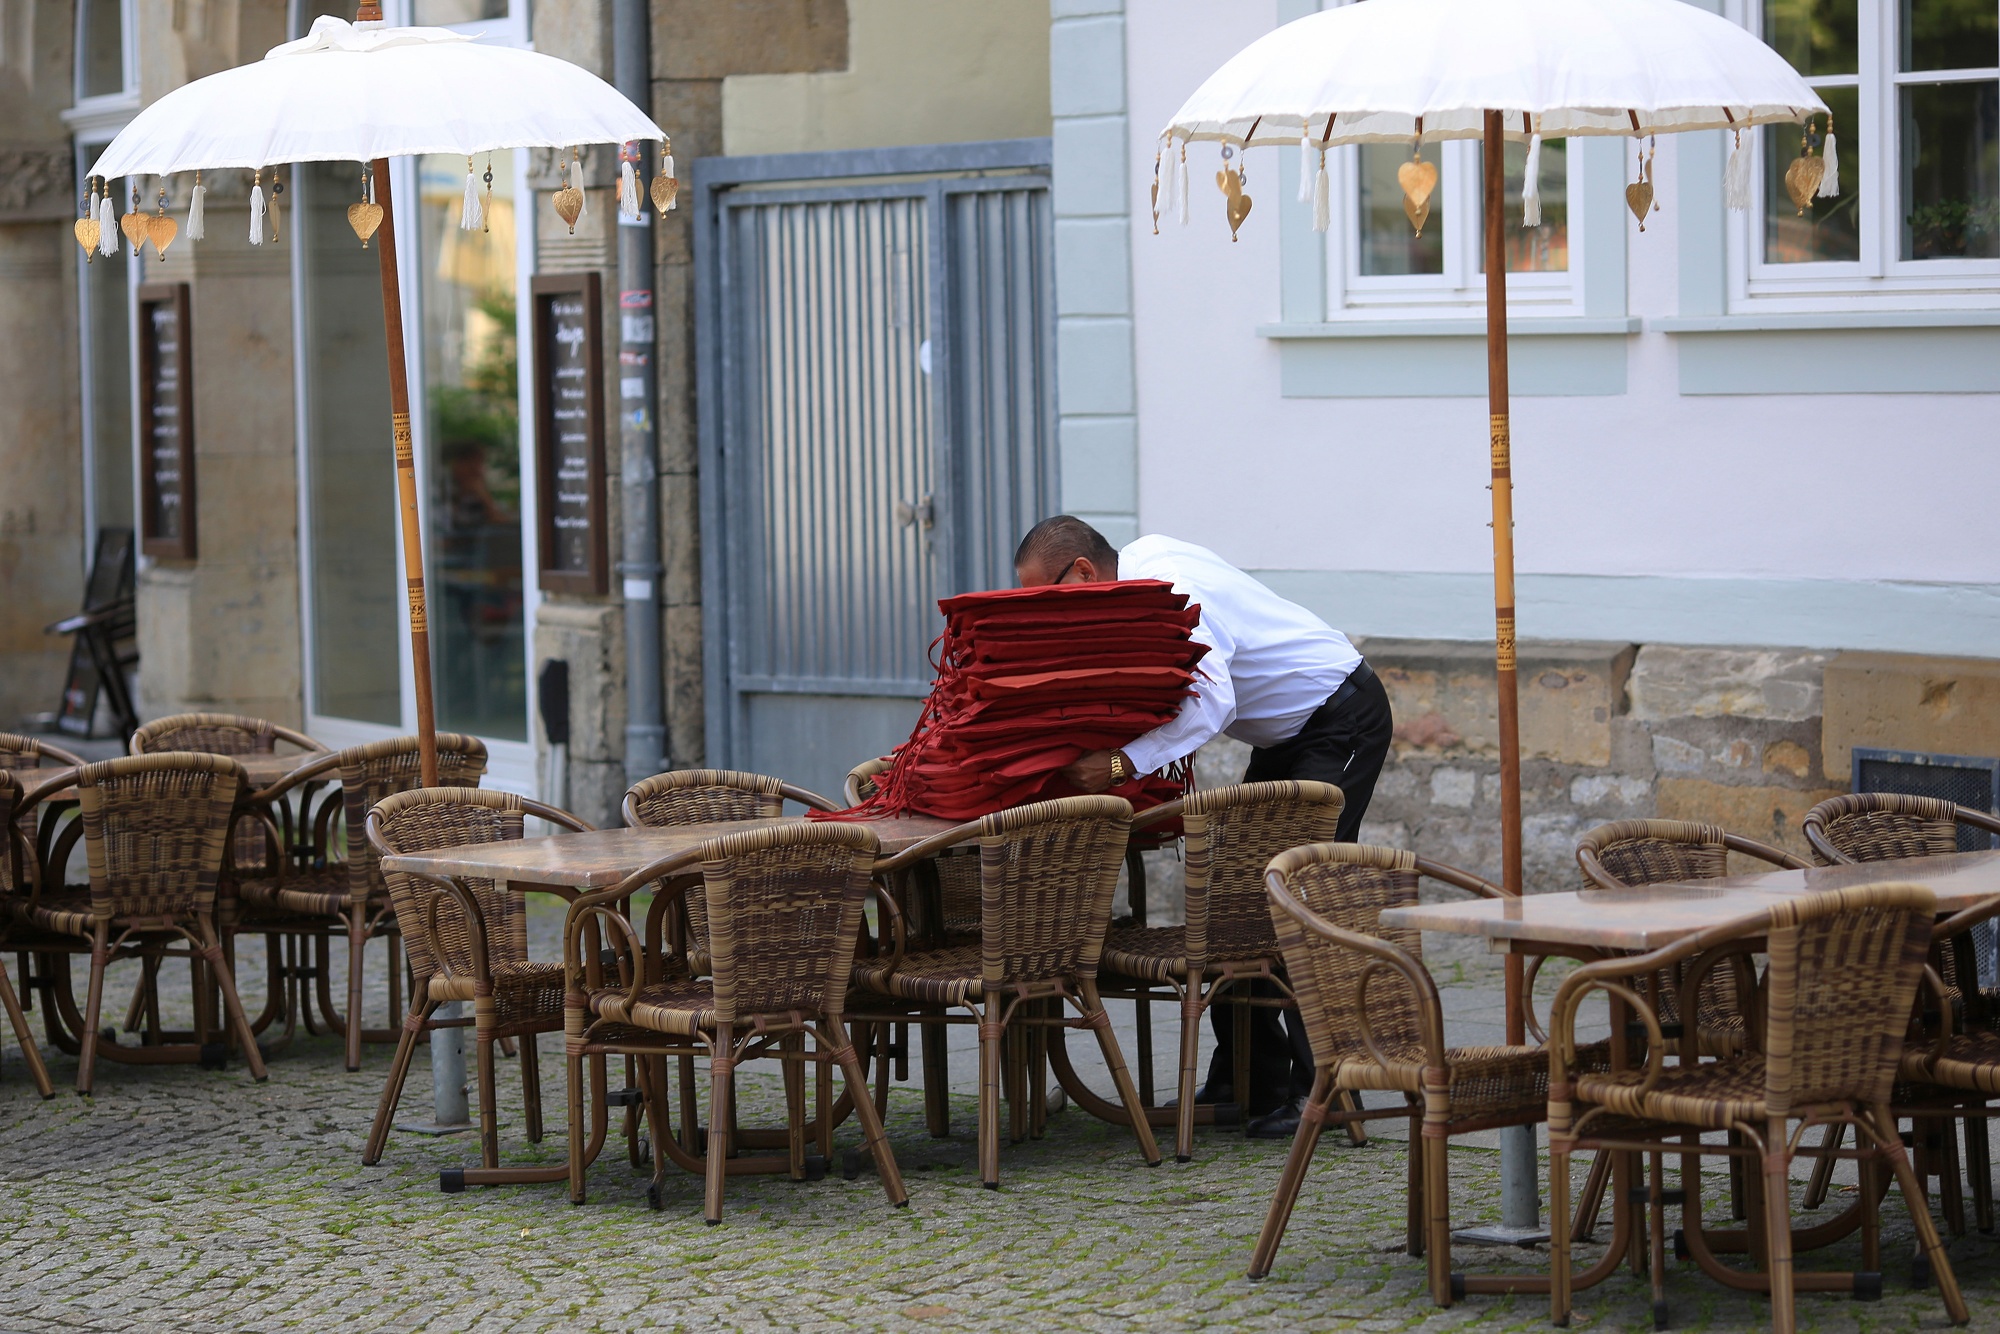 A waiter prepares table at a restaurant in the main city square in Erfurt, Germany.